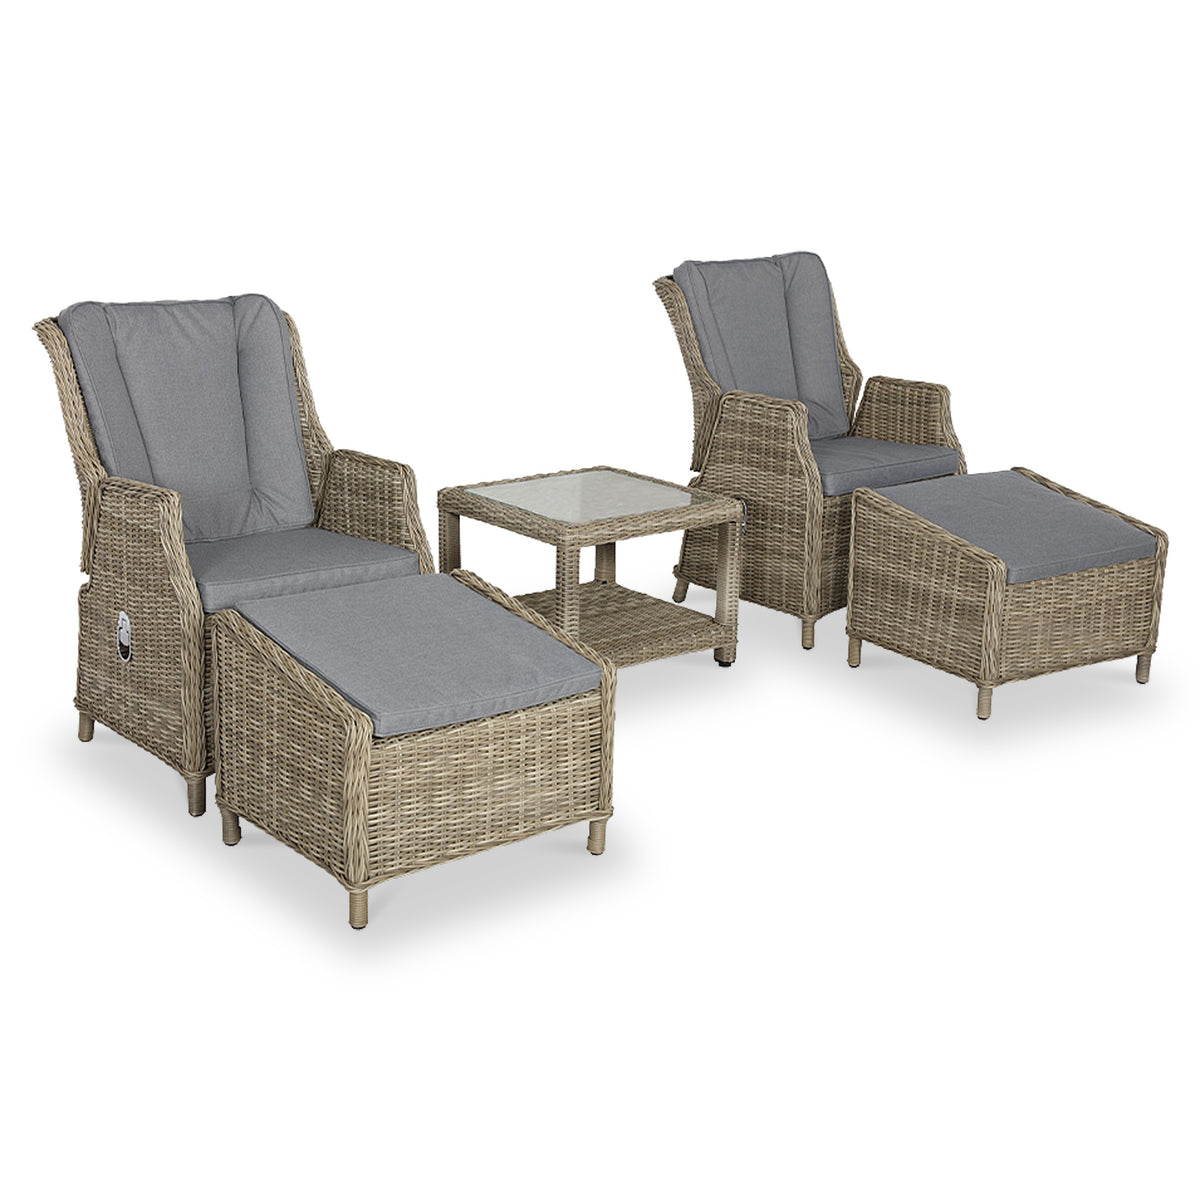 Wentworth Rattan Deluxe Reclining Chair Set from Roseland